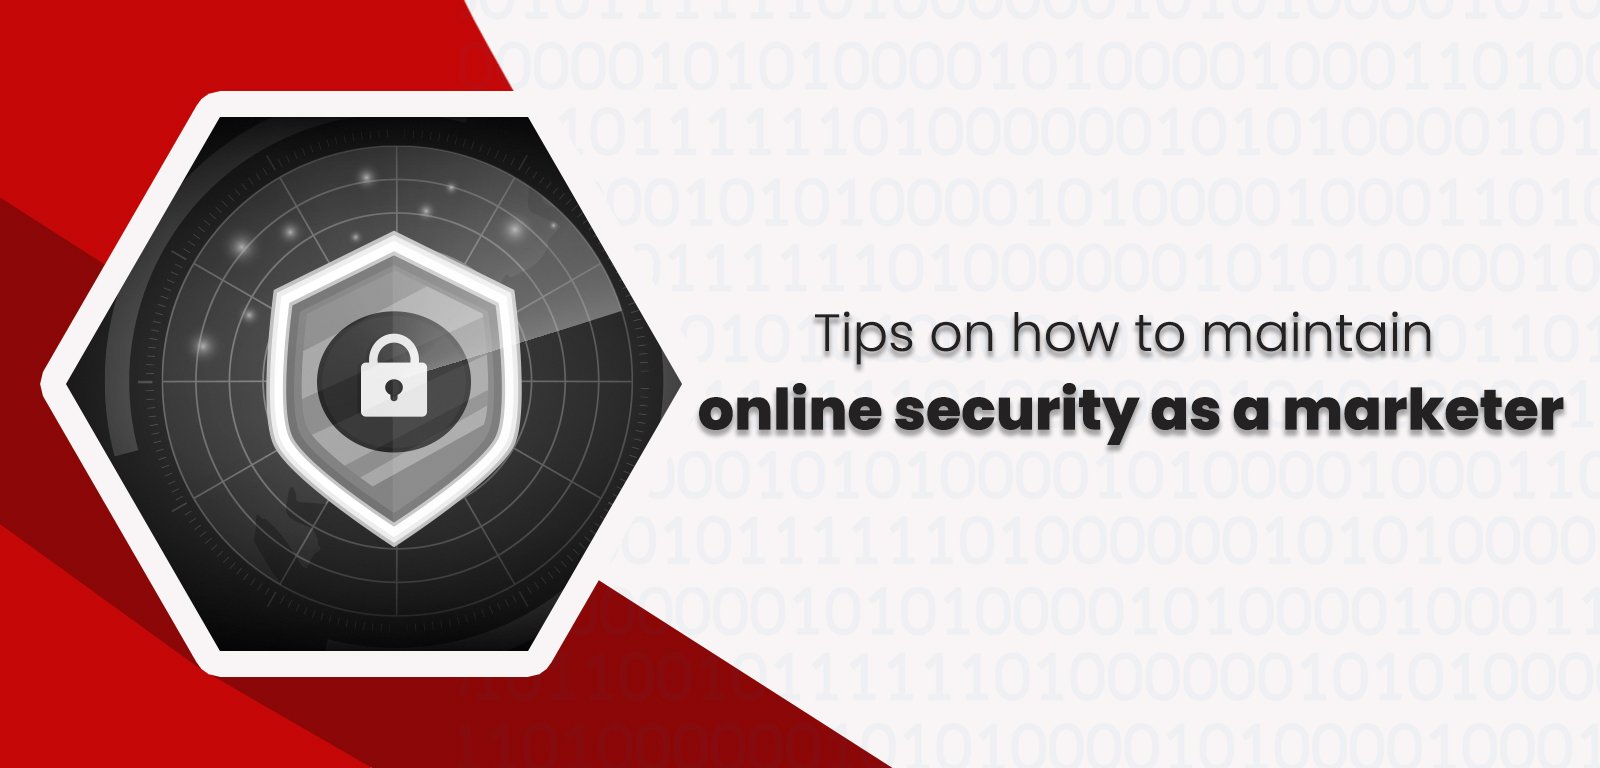 Tips on how to maintain online security as a marketer